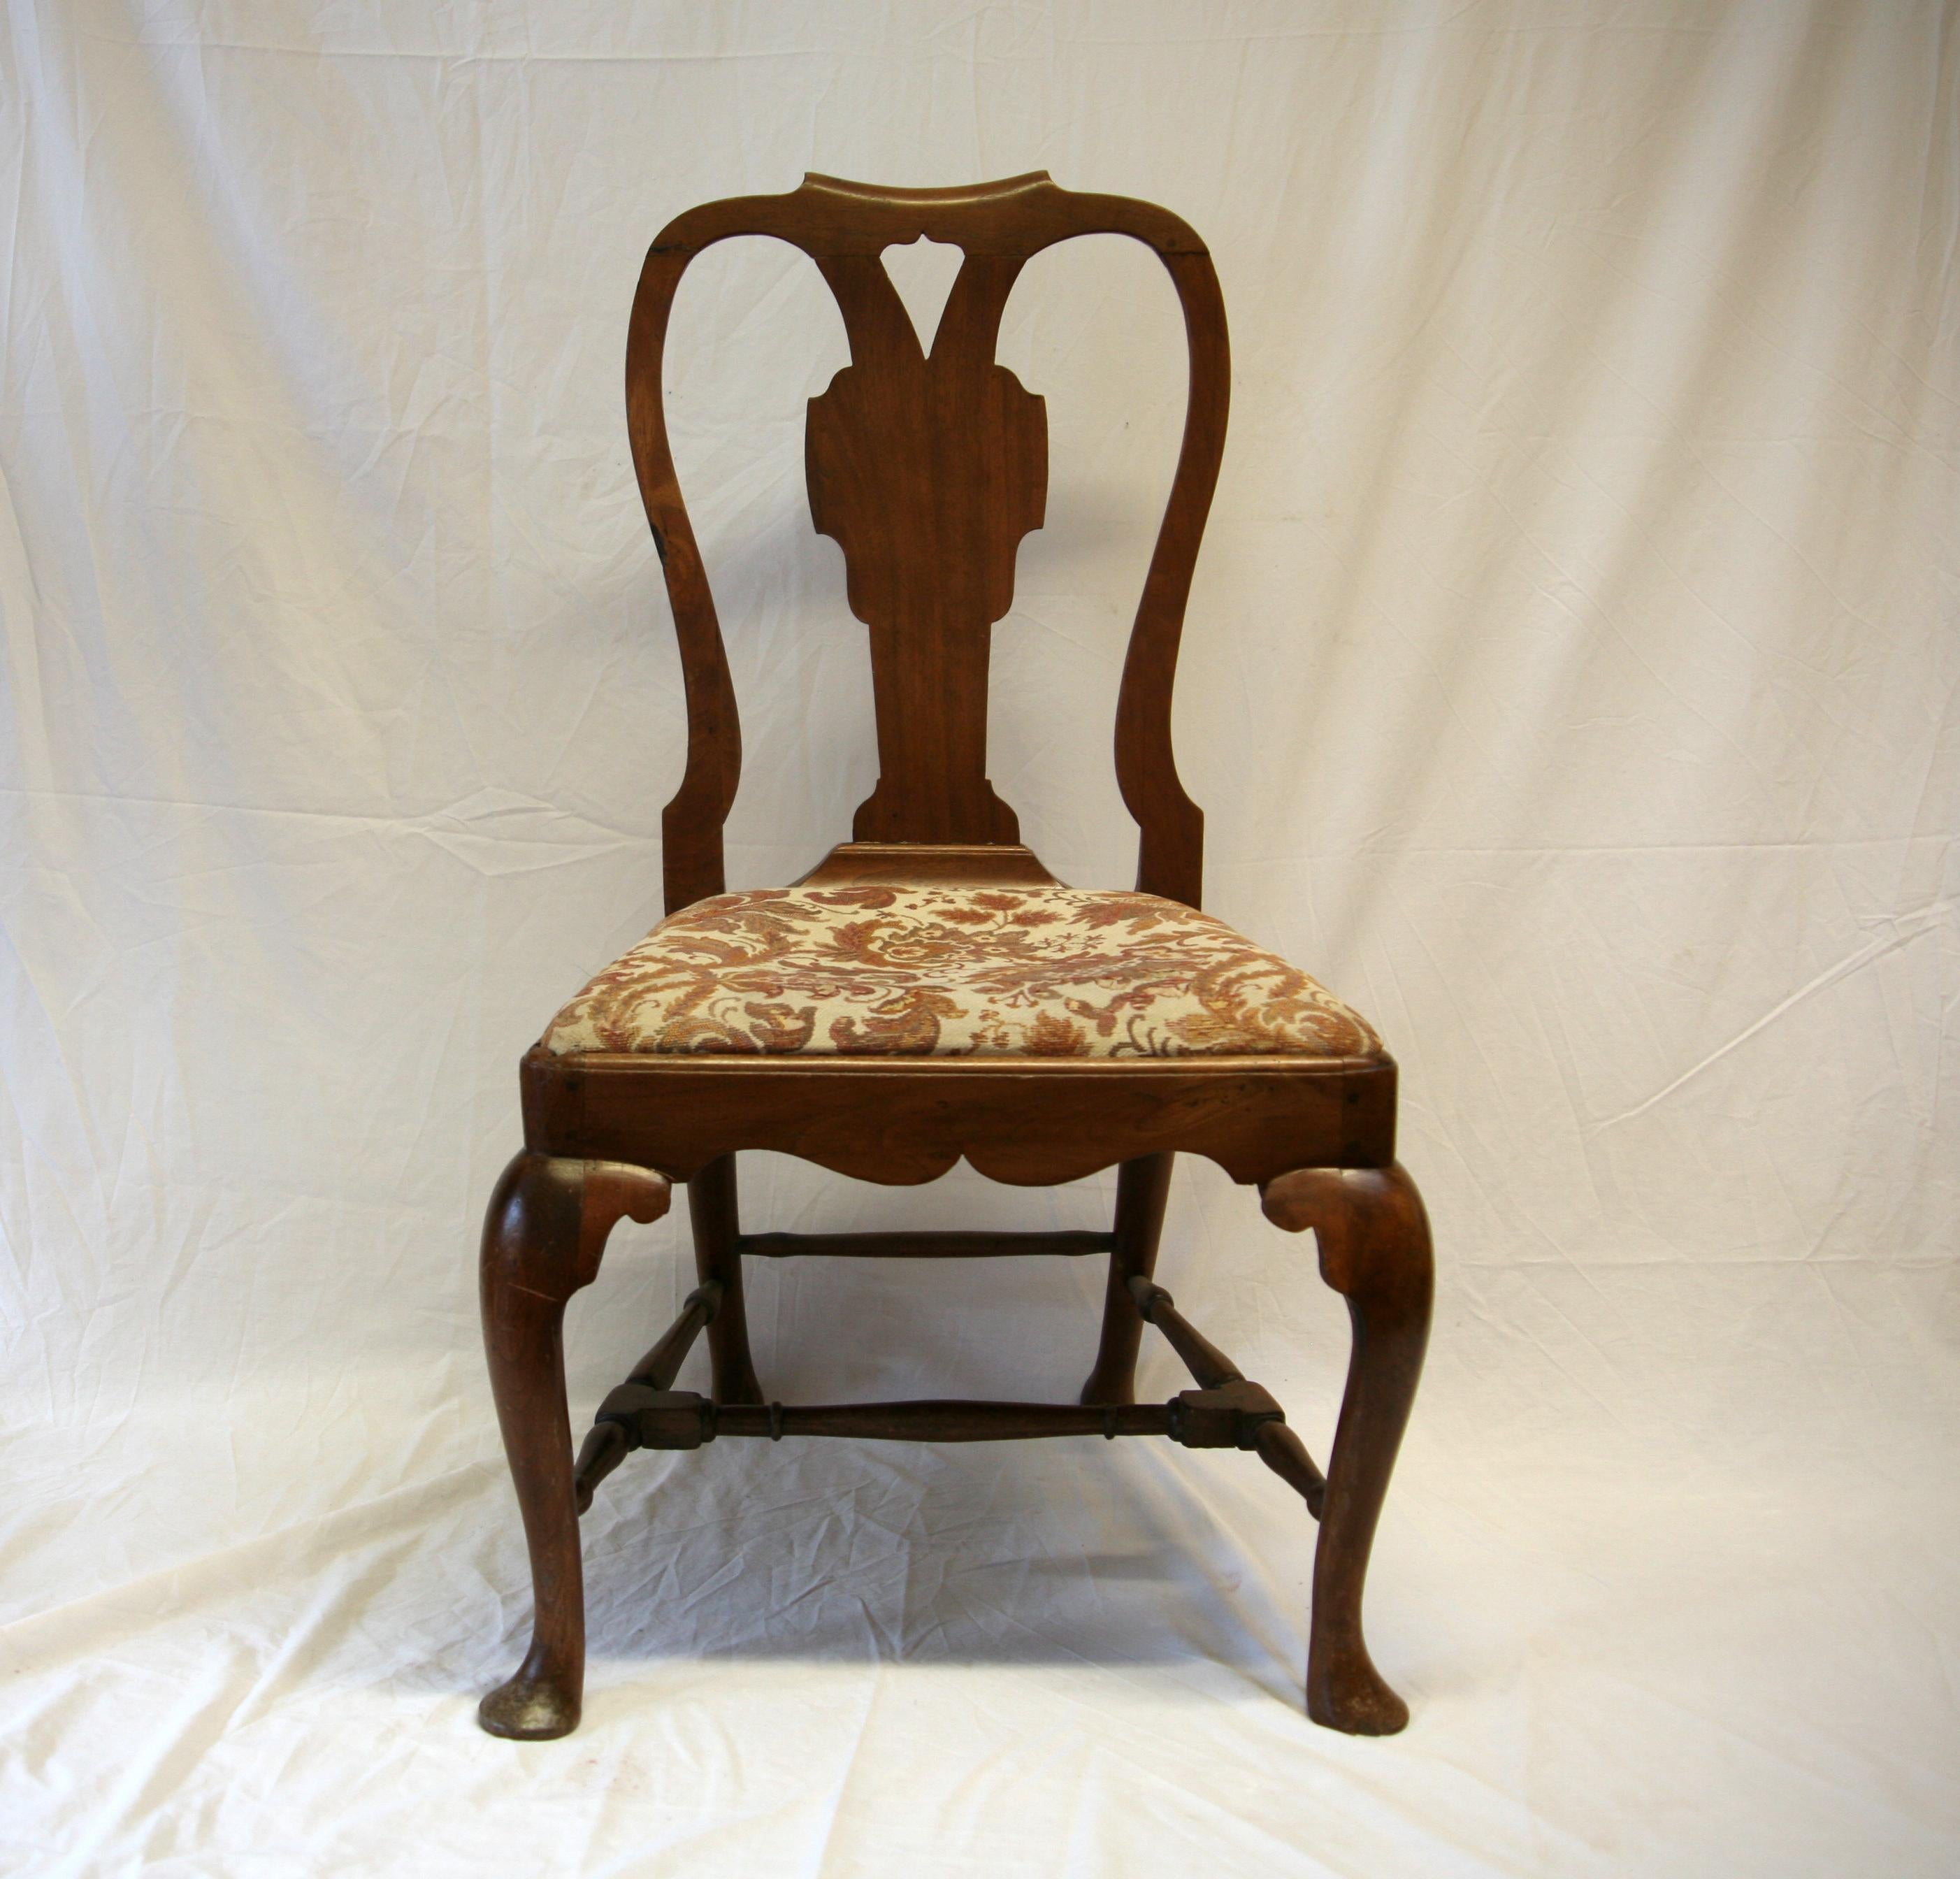 With fiddle shaped back, cabrial legs and drop in seat.

All in original condition, although the seat will have been re-covered at some stage.

The legs are united with stretchers.

Height of back:
95 cms 
Height of seat:
44 cms
width